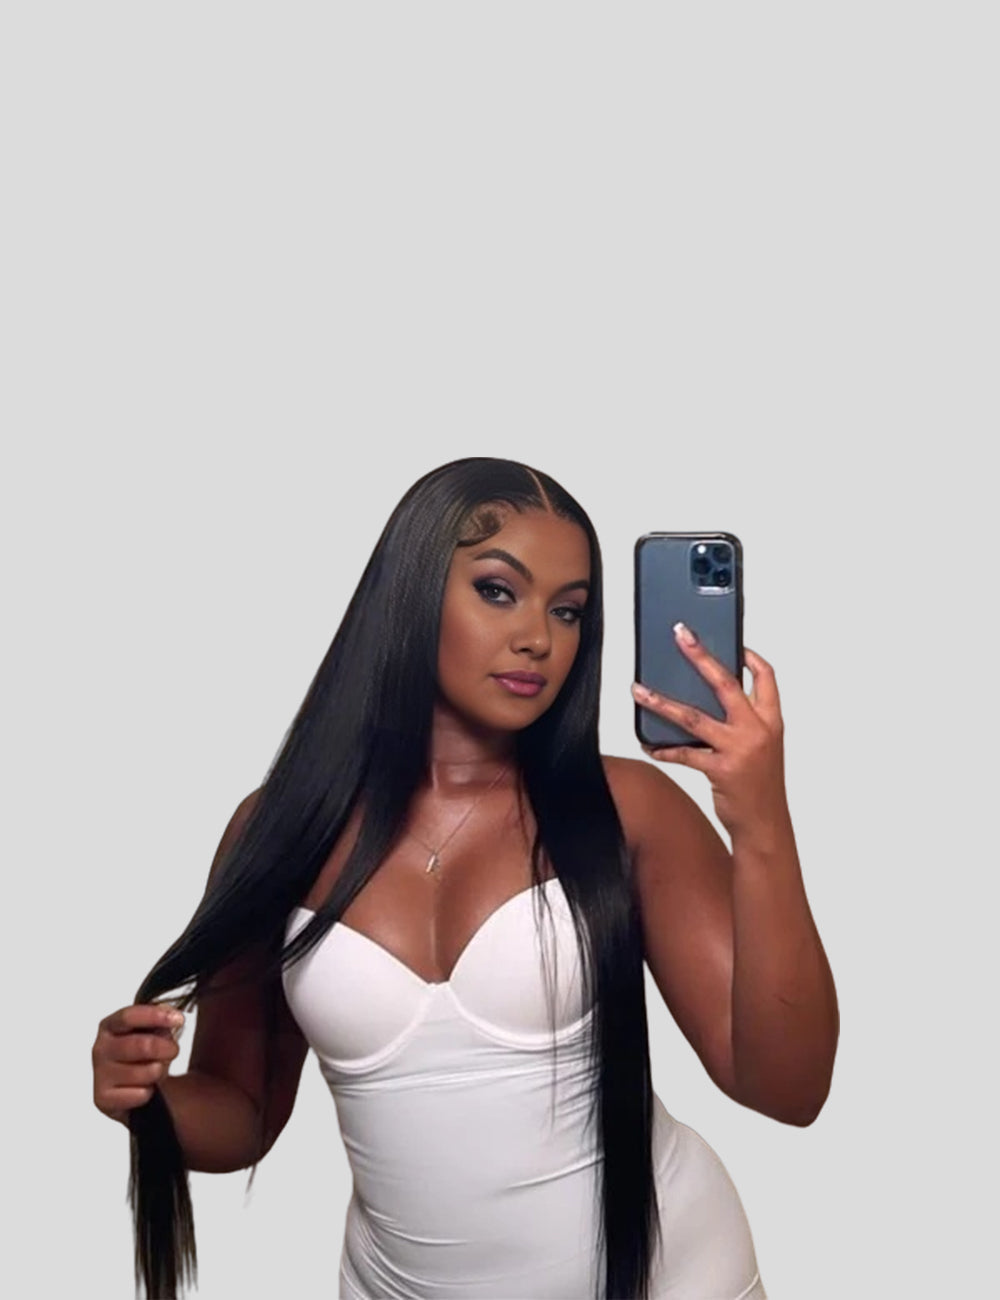 360 Lace Front Wigs With Baby Hair 30Inch Indian Straight HD Human Hair Lace Frontal Wig